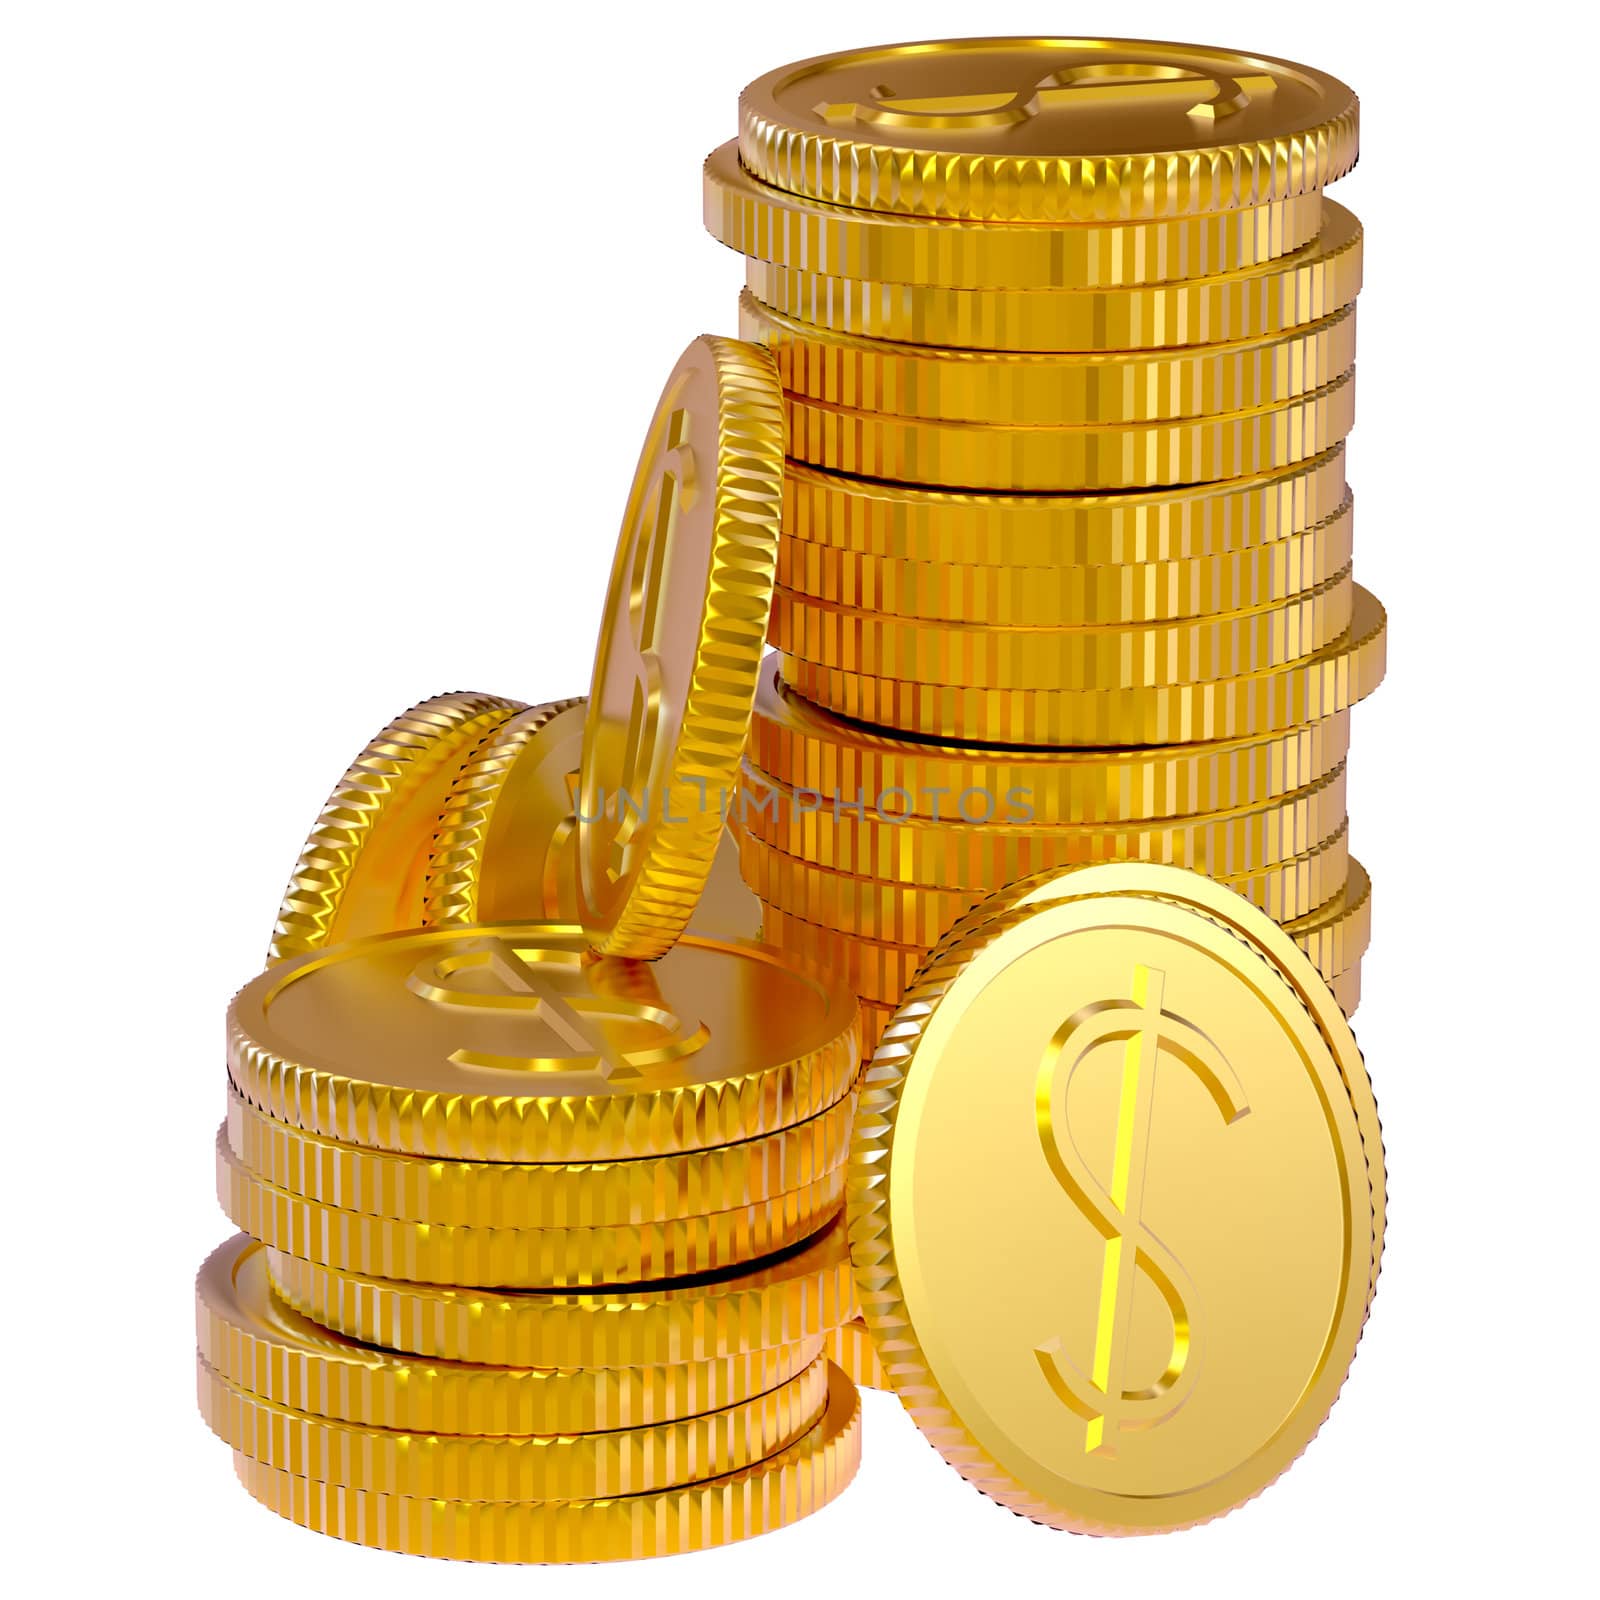 gold dollars coins as a symbol of microcredit in banks